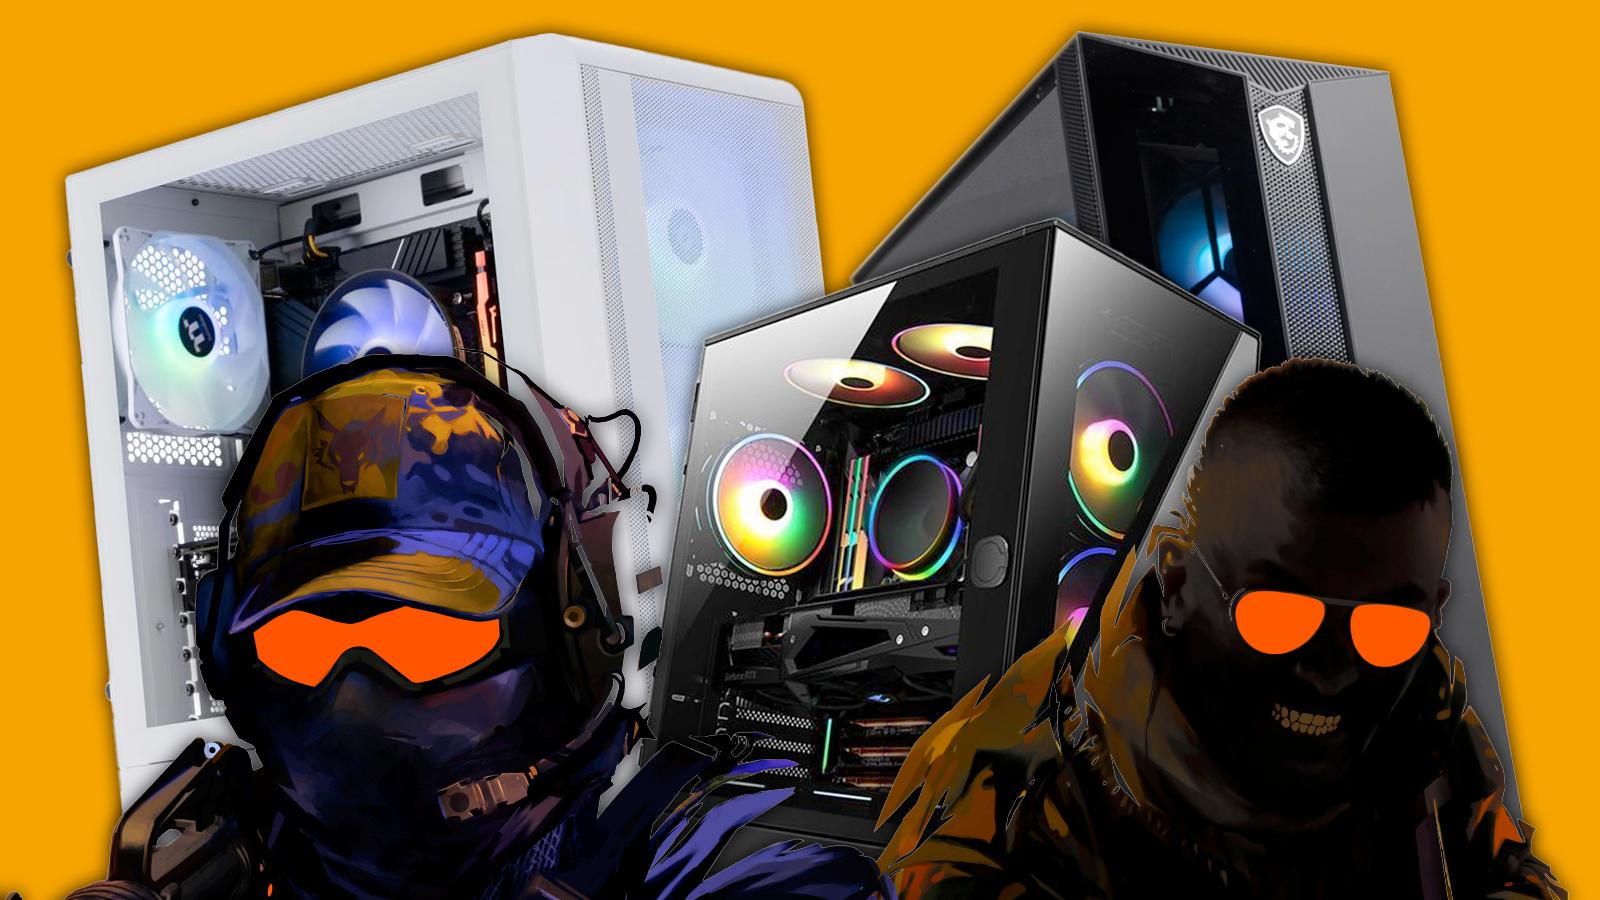 PC cases behind Counter-Strike 2 art